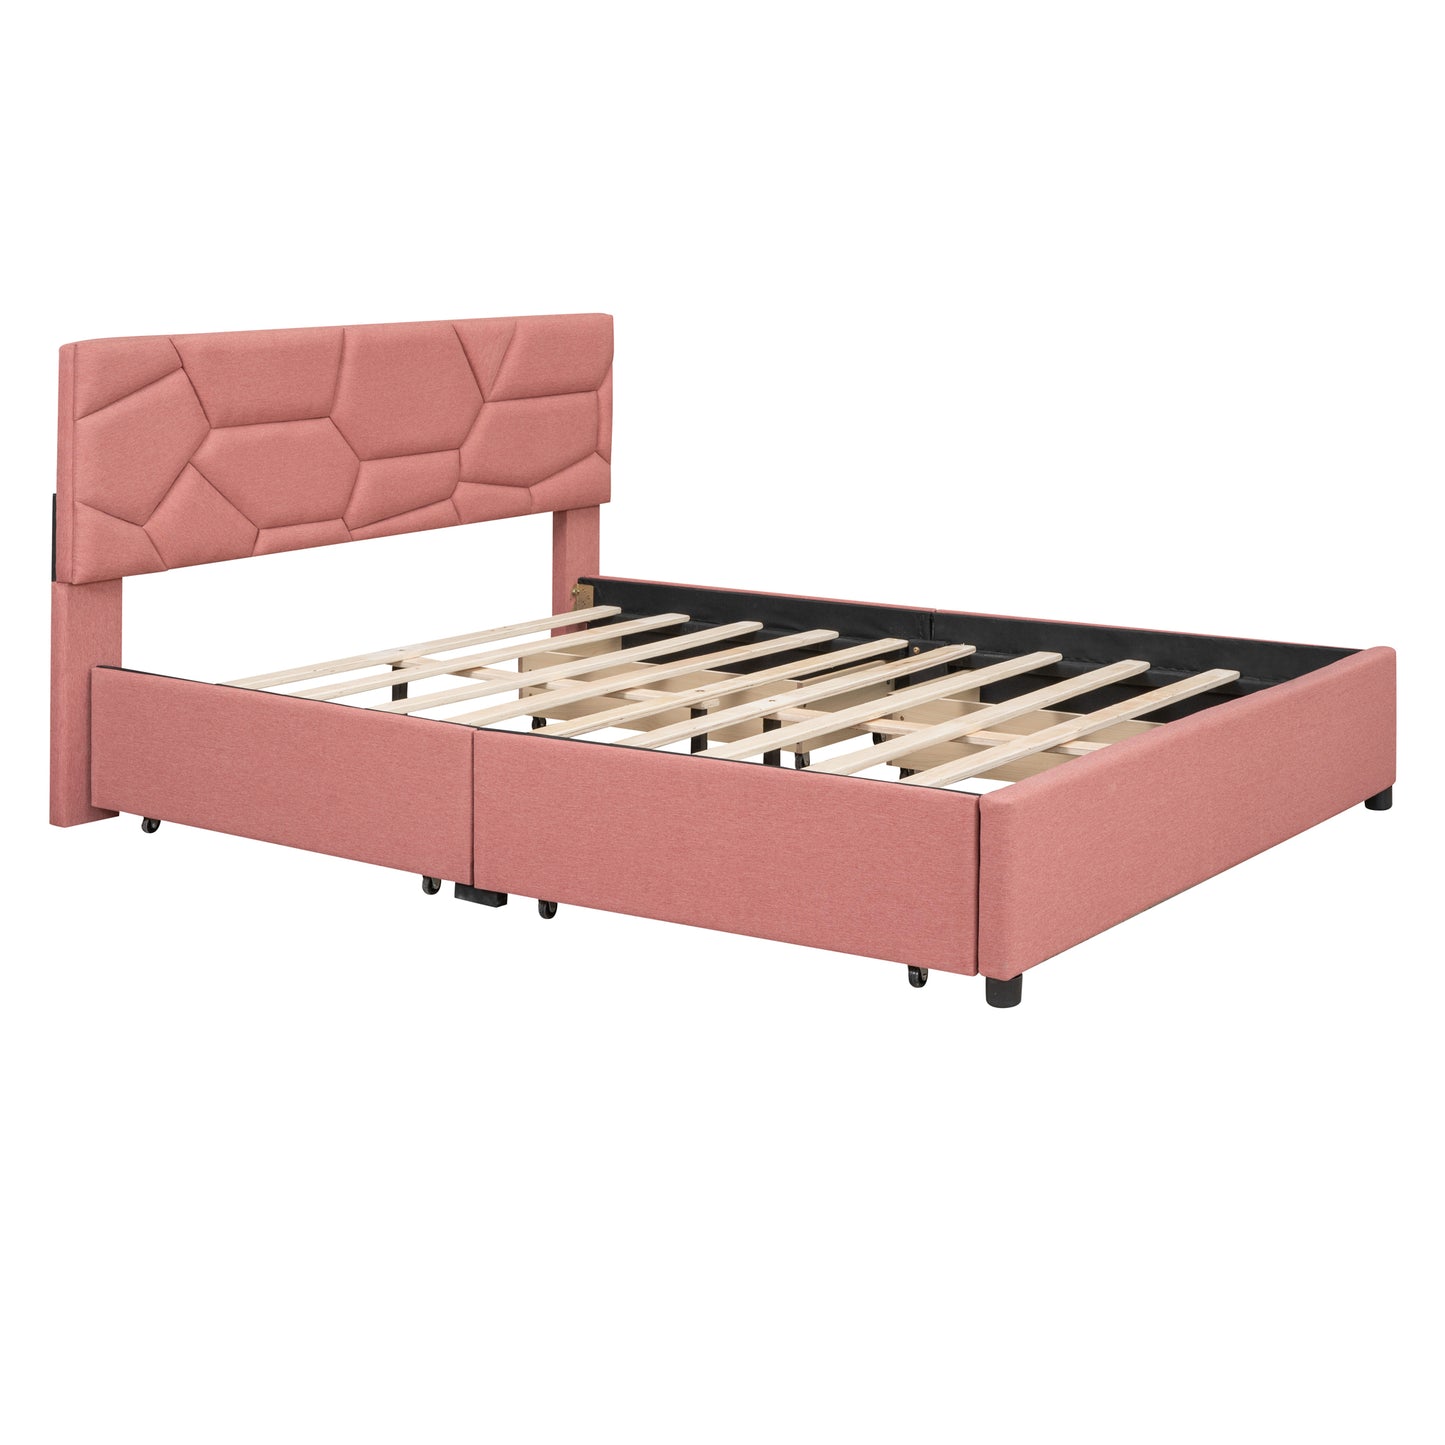 Queen Size Upholstered Platform Bed with Brick Pattern Headboard and 4 Drawers, Linen Fabric, Pink